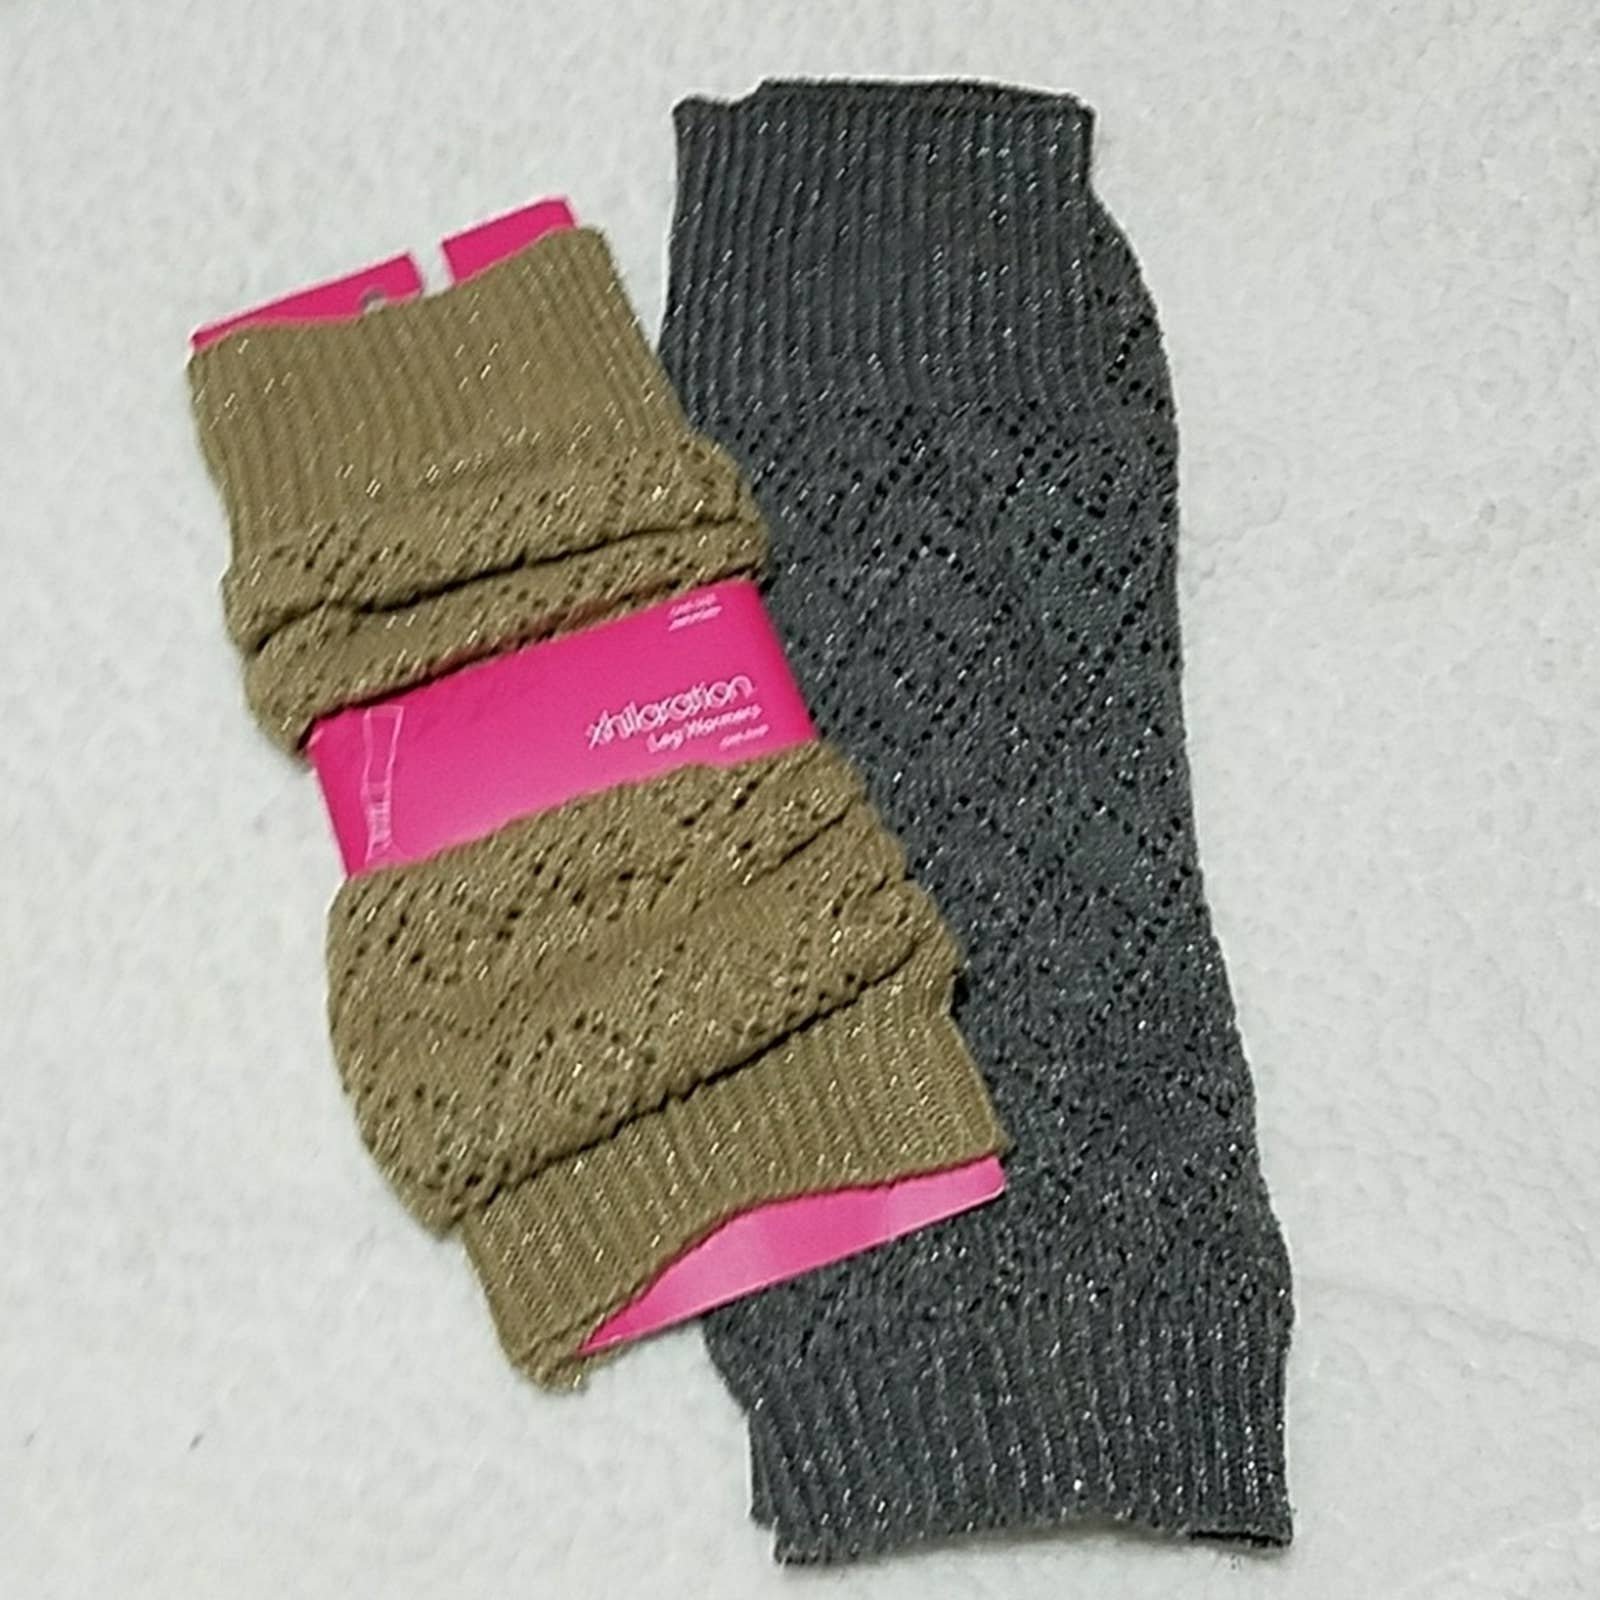 Set of 2 leg warmers Gray and Tan O/S J2Uxs5eUY